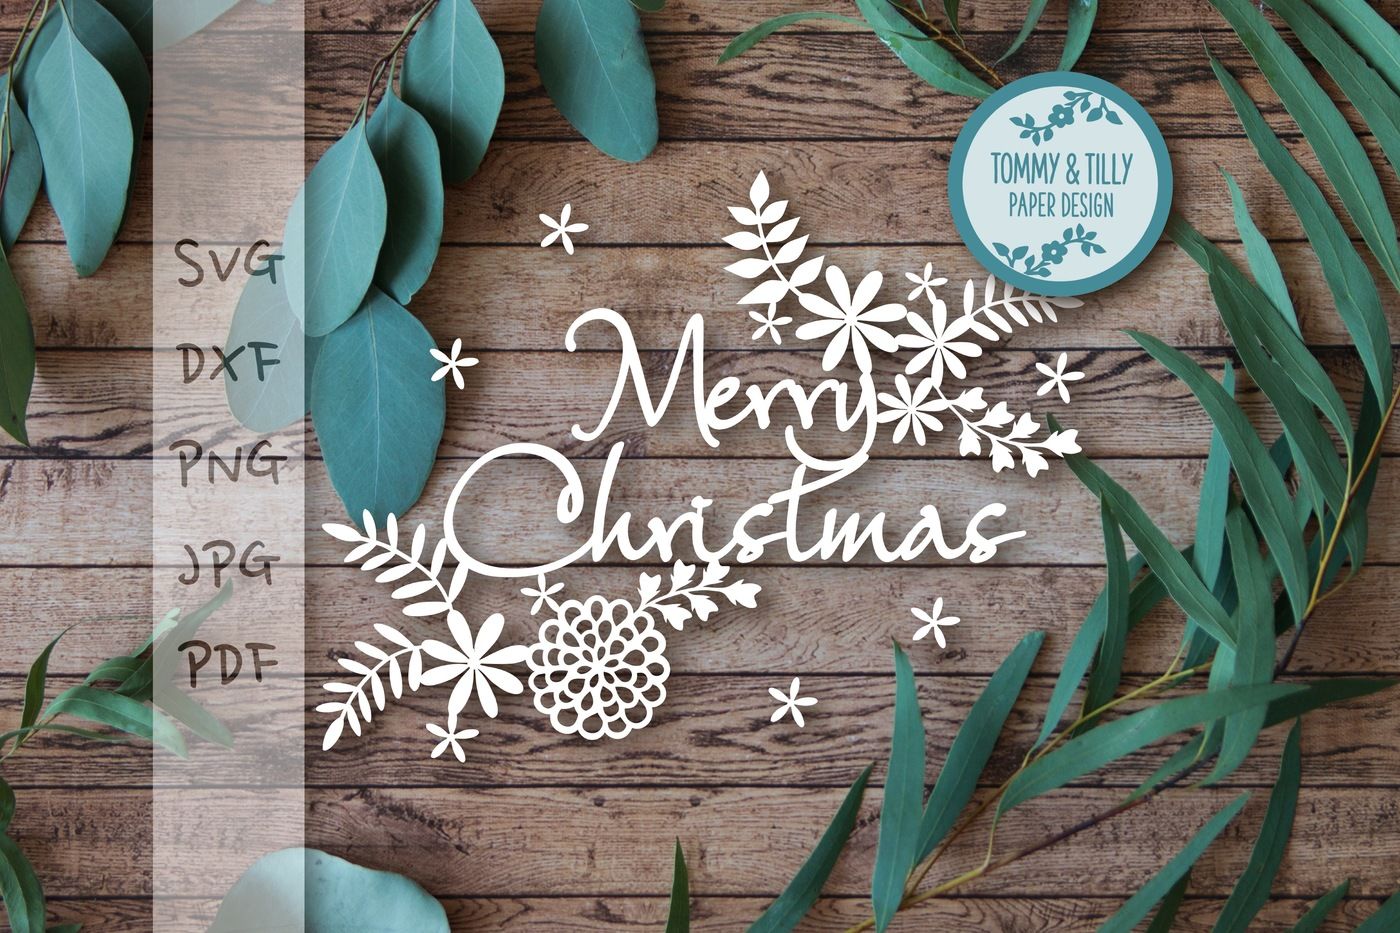 Foliage Merry Christmas Svg Dxf Png Pdf Jpg By Tommy And Tilly Design Thehungryjpeg Com